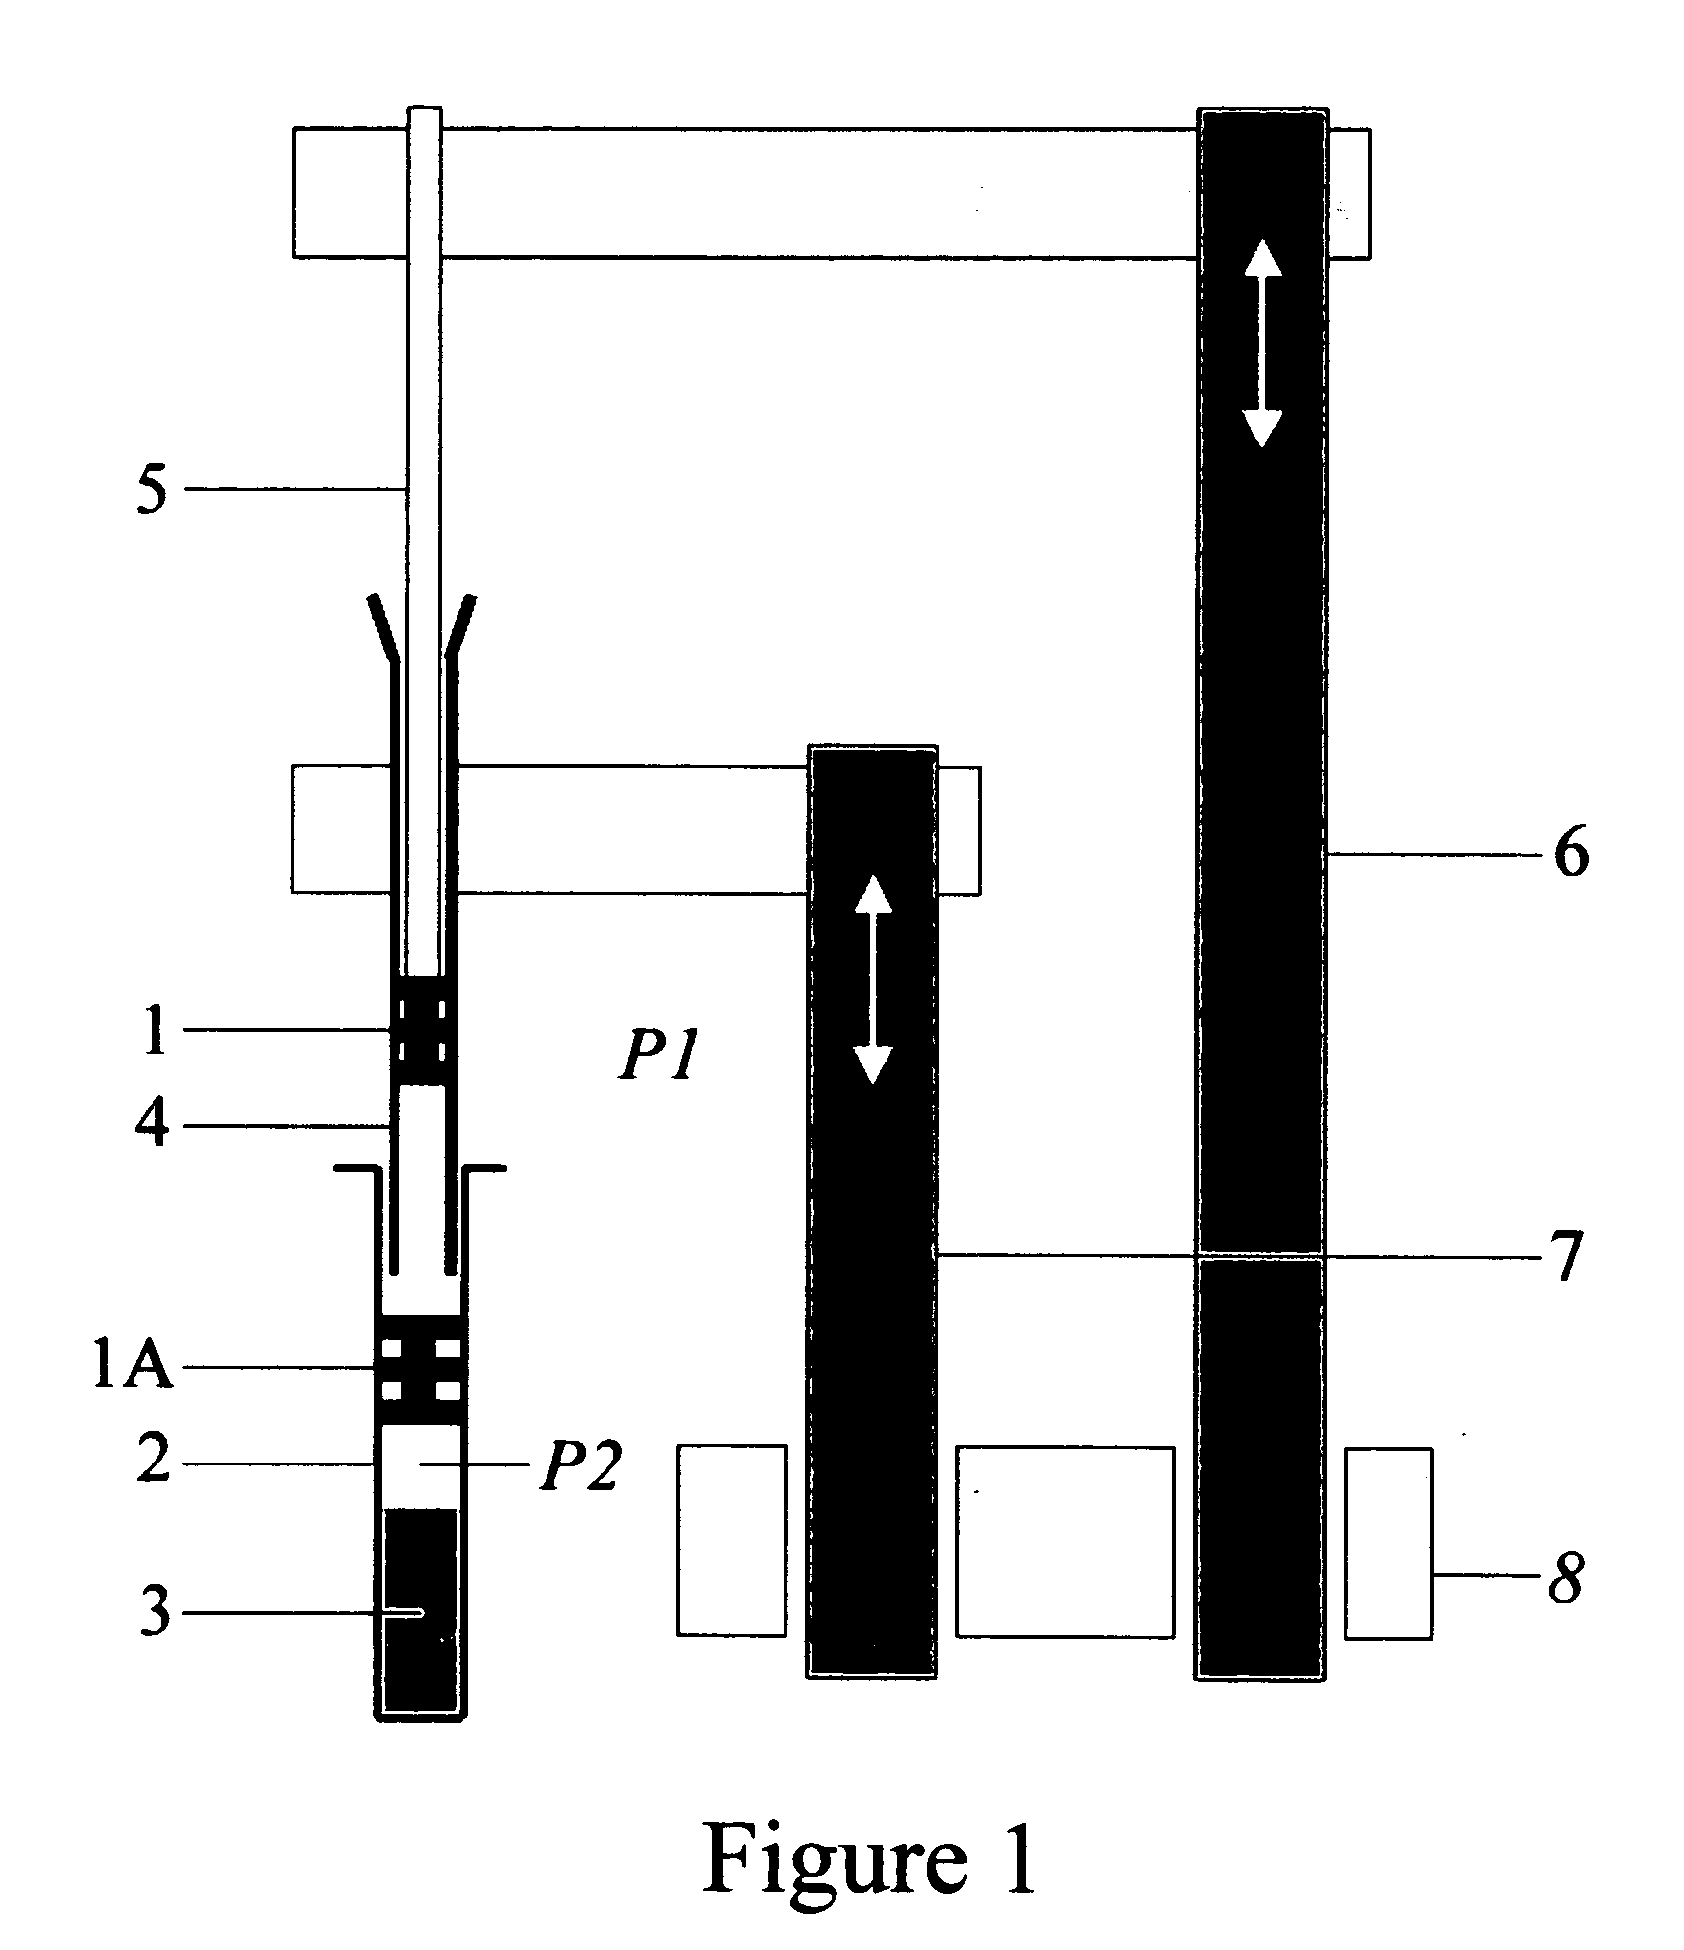 Method and apparatus to insert stoppers into prefilled syringes